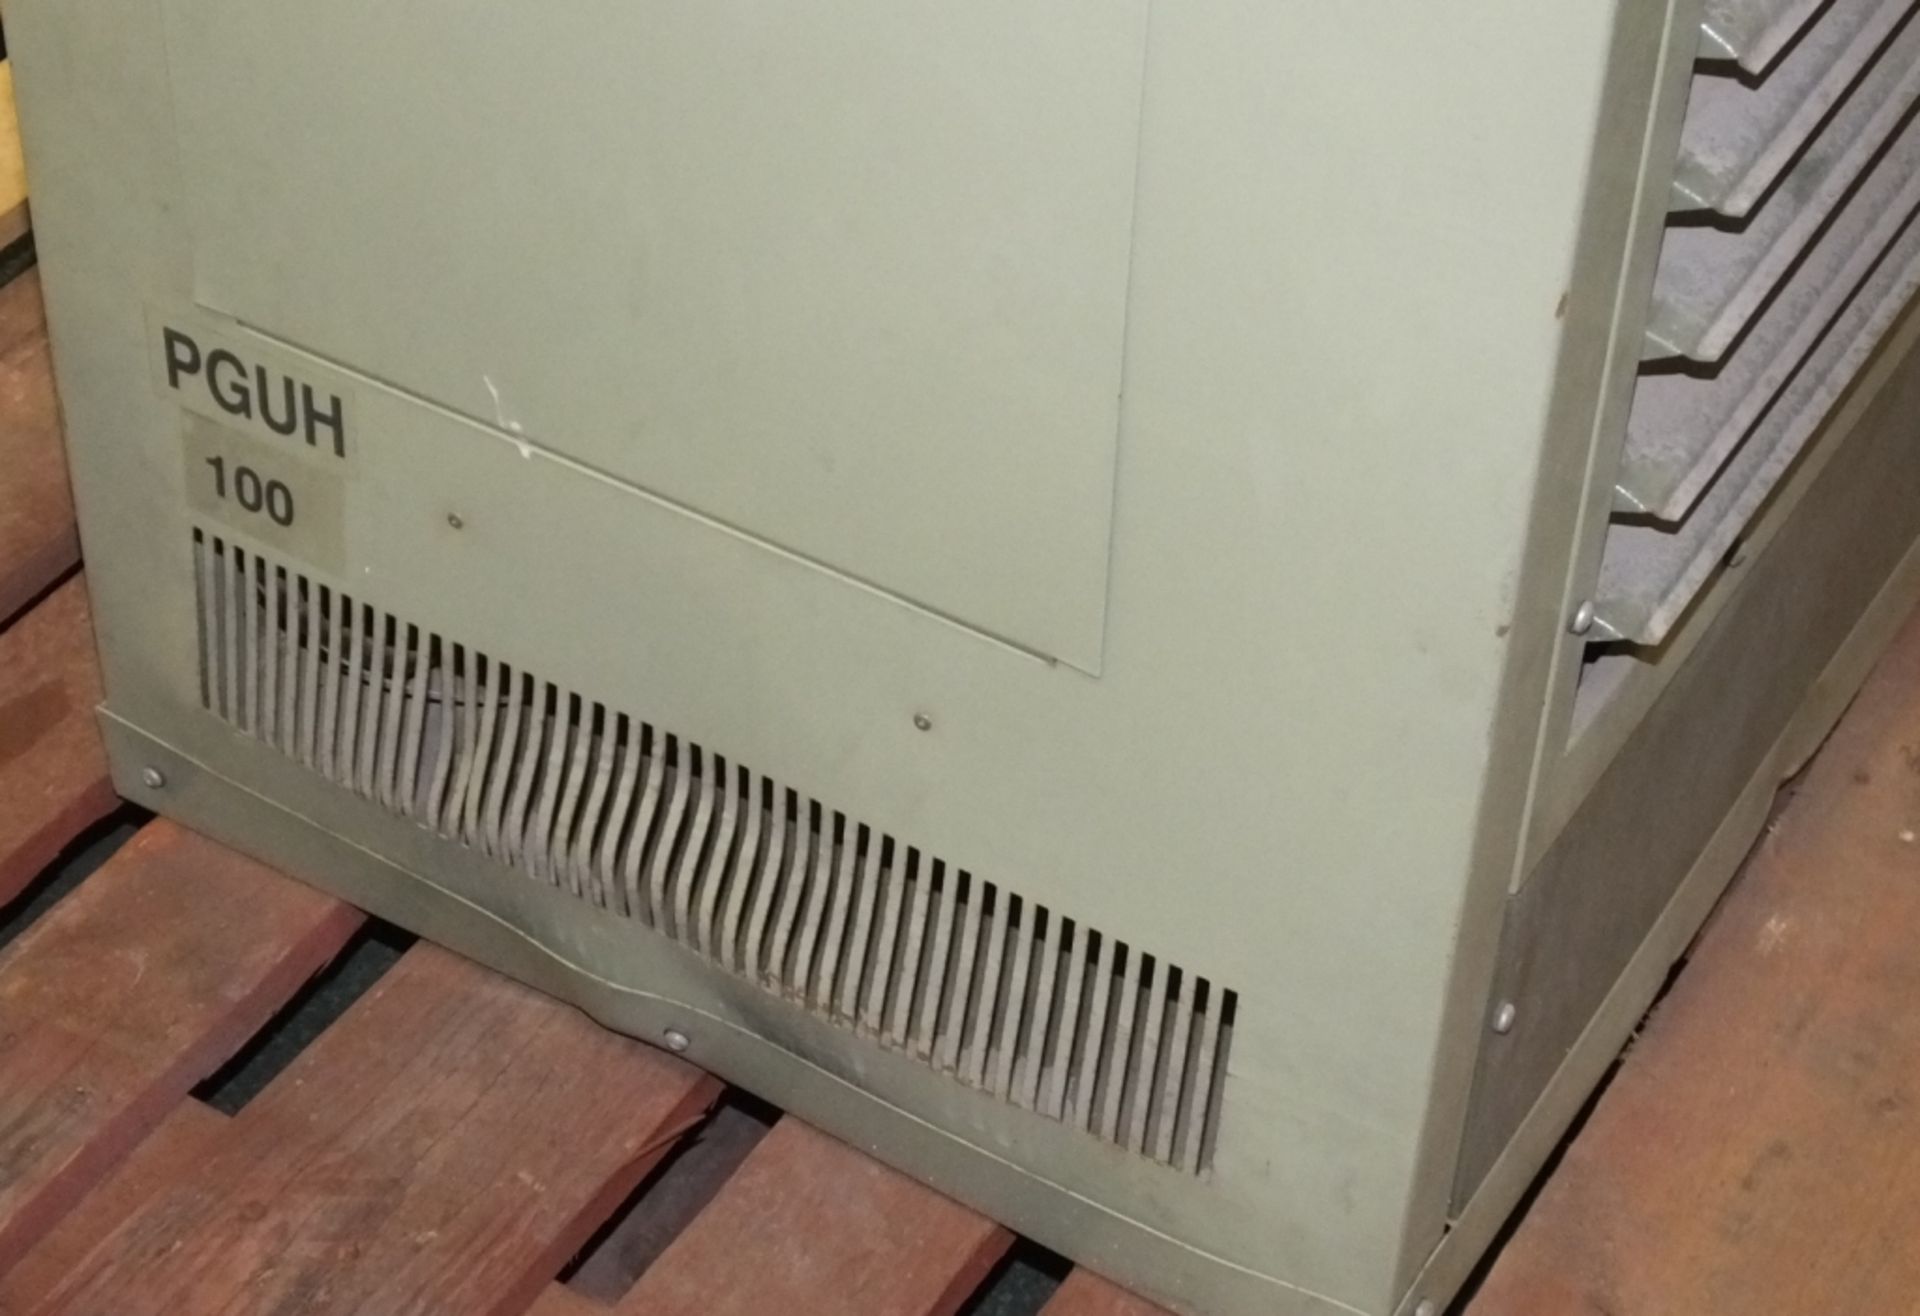 Powrmatic Industrial Gas Heater unit - 29kW - Image 4 of 6